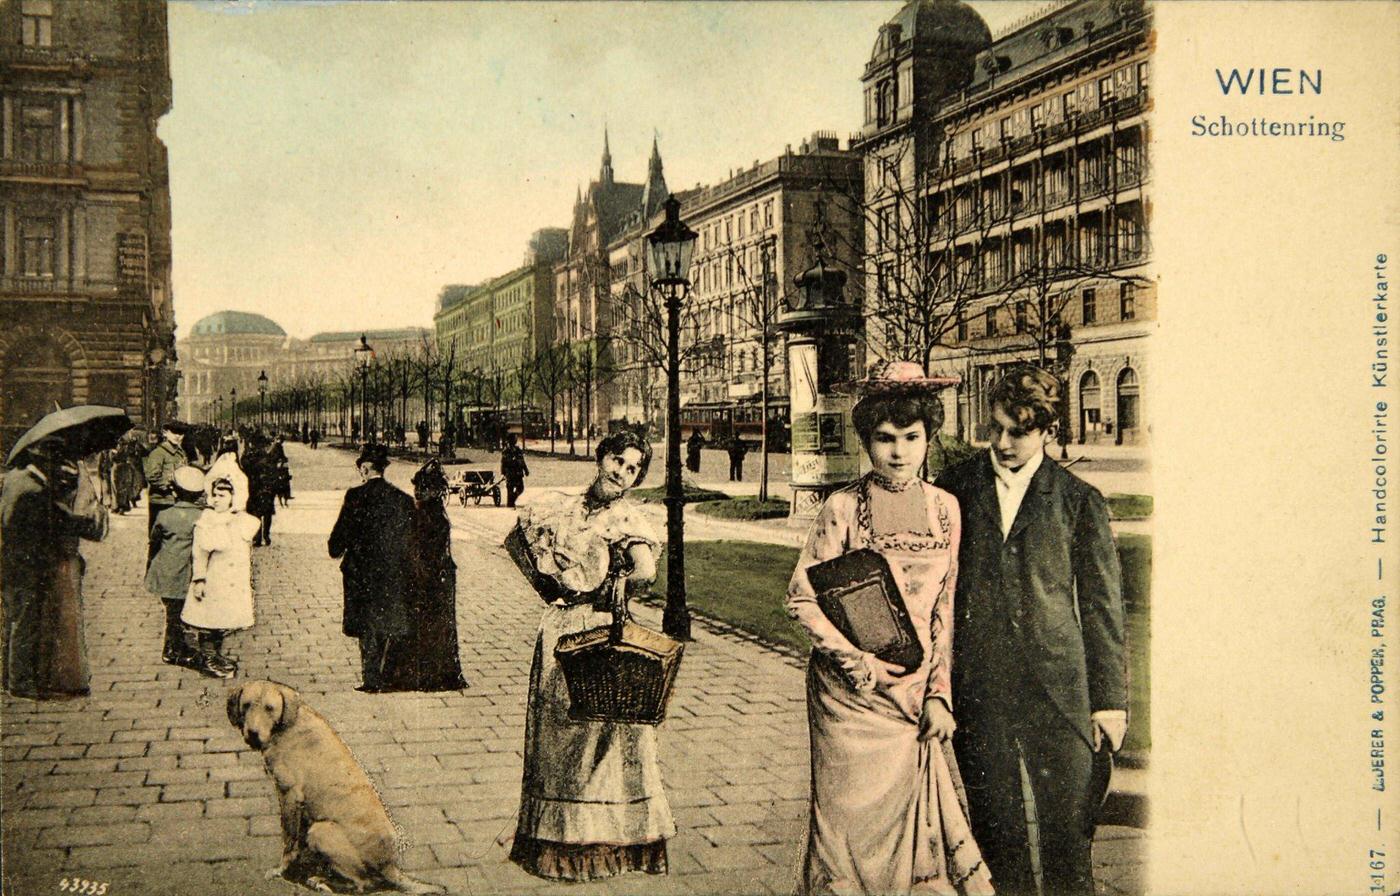 Vienna's Schottenring from 1905 with mounted staffage.